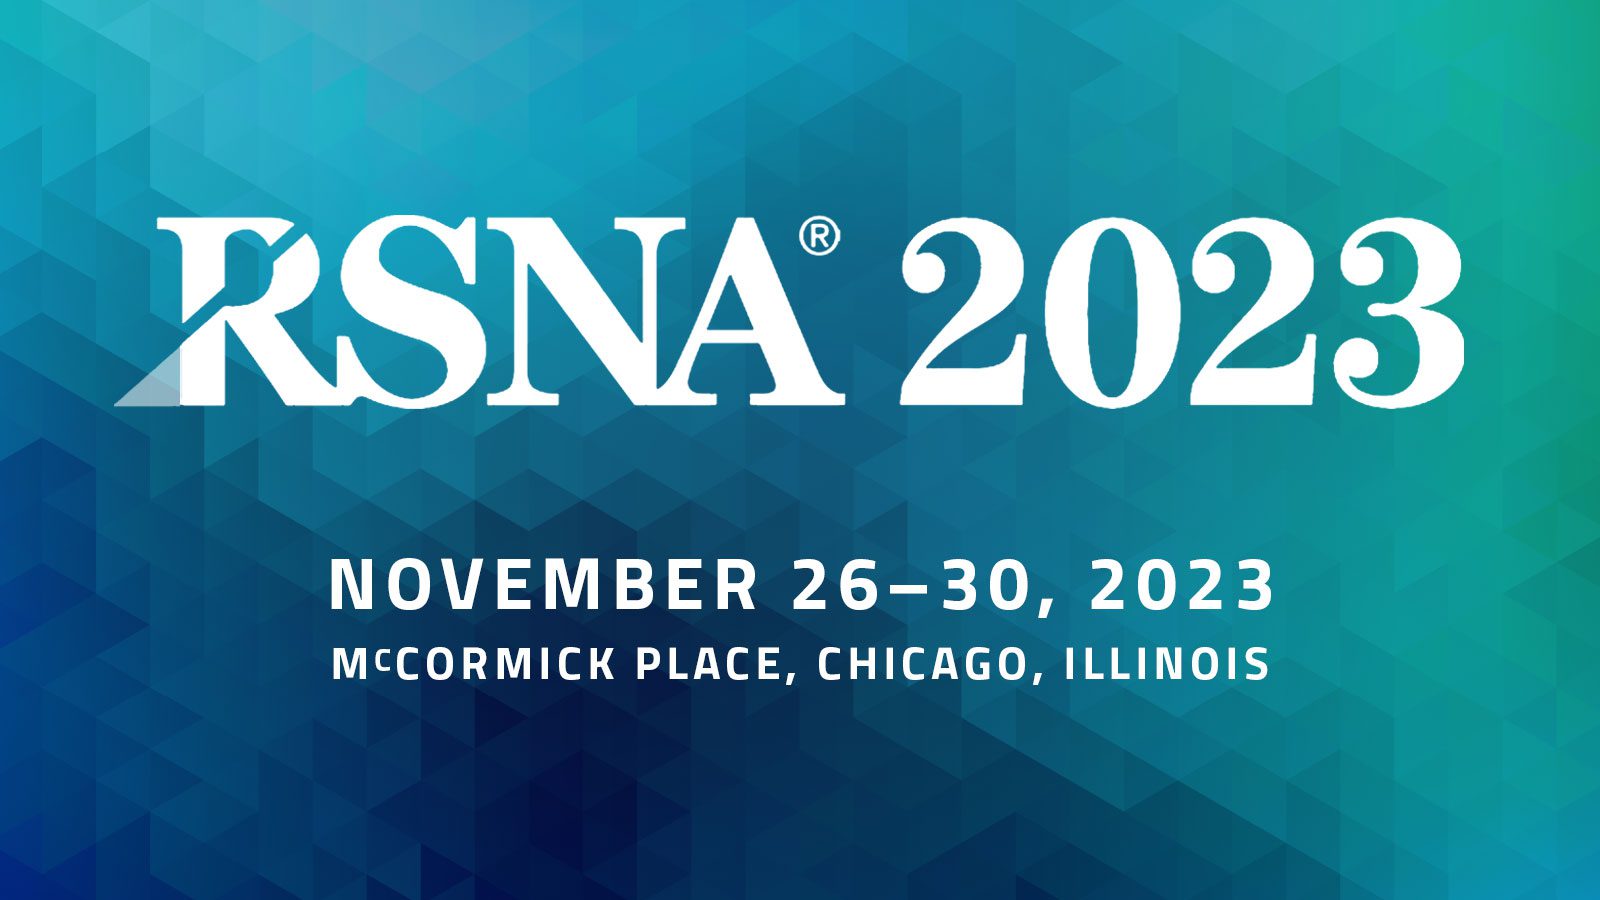 RSNA Radiological Society of North America Annual Meeting 2023